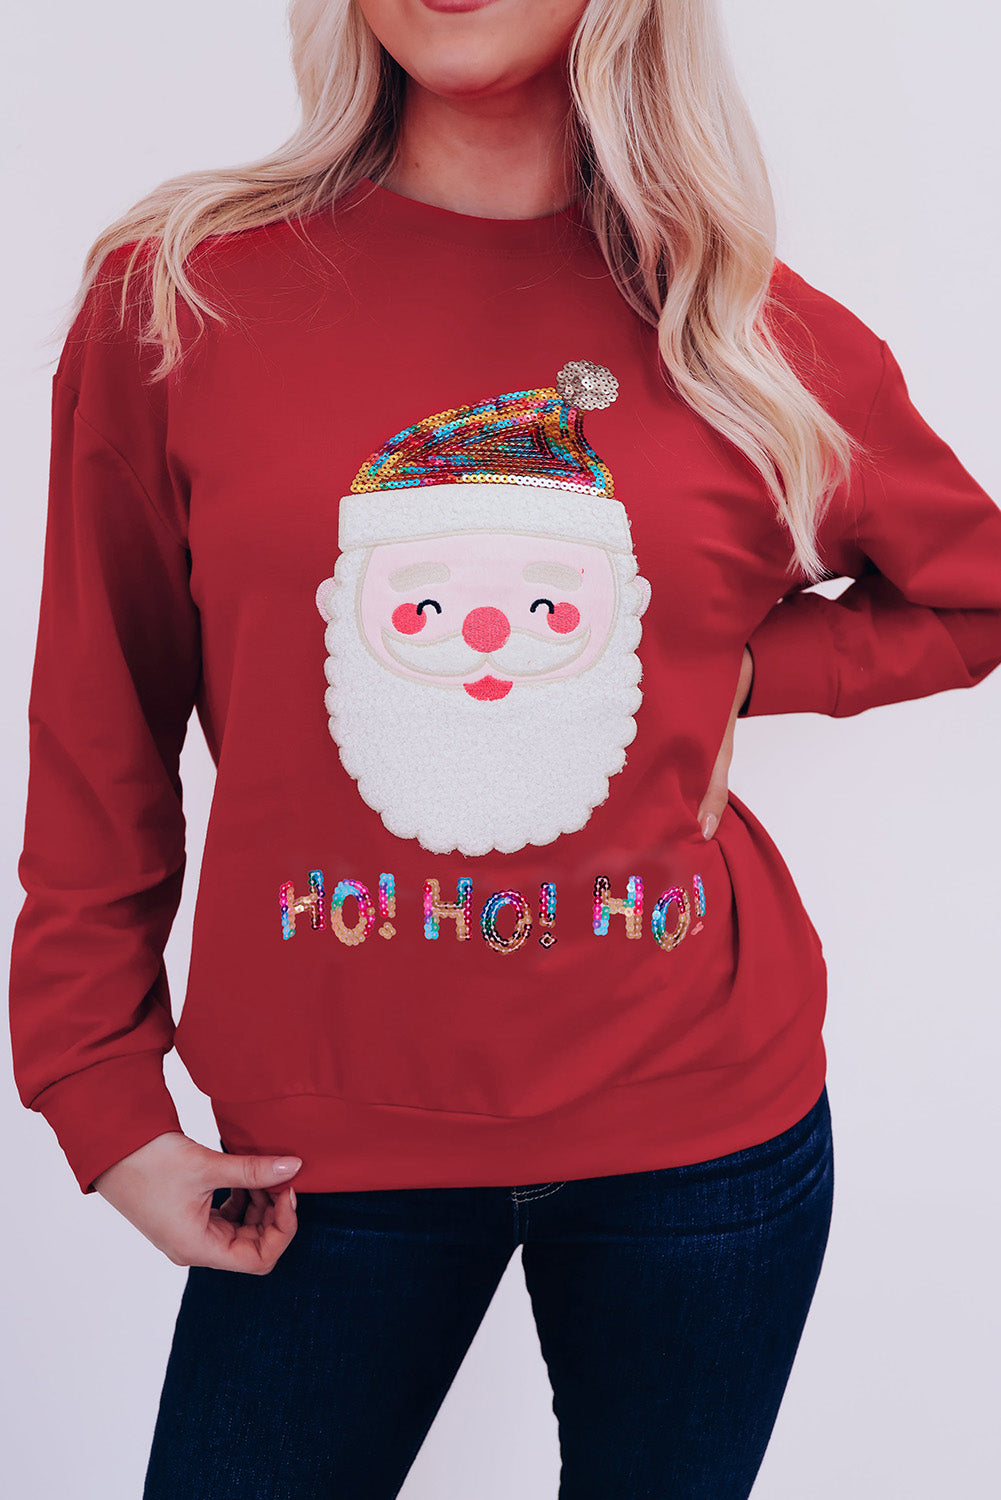 Fiery Red HO HO HO Sequined Santa Claus Sweatshirt Red-2 70%Polyester+30%Cotton Graphic Sweatshirts JT's Designer Fashion